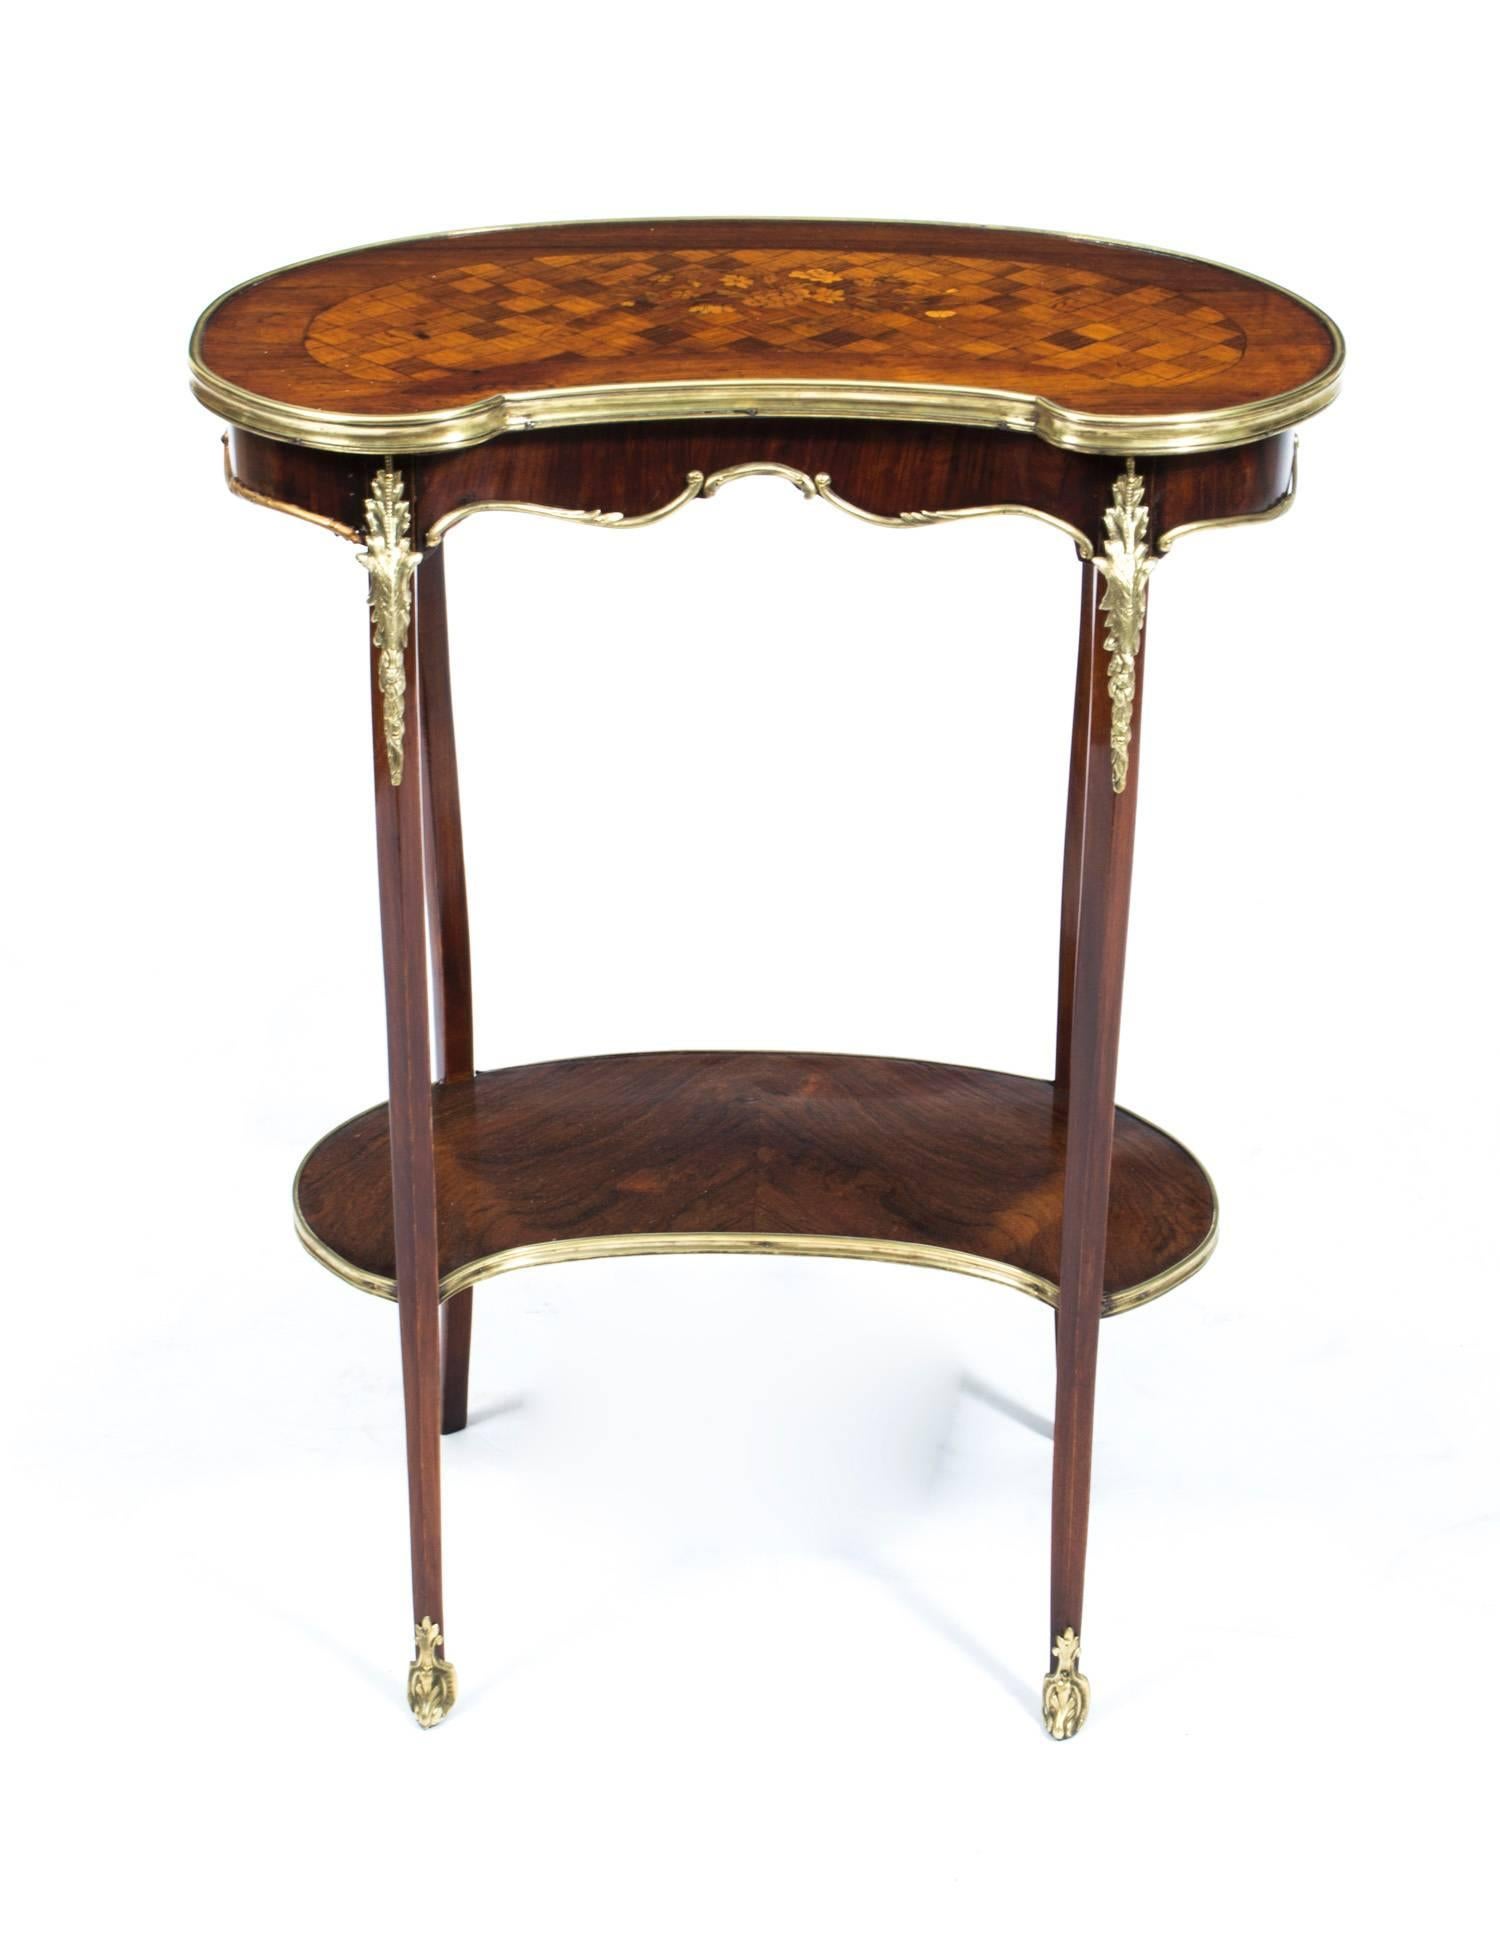 This is a delightful antique French rosewood and parquetry kidney shaped occasional table with ormolu mounts, in Louis XV style and circa 1900 in date.

This beautiful table is made from rosewood and features geometric parquetry inlay with floral